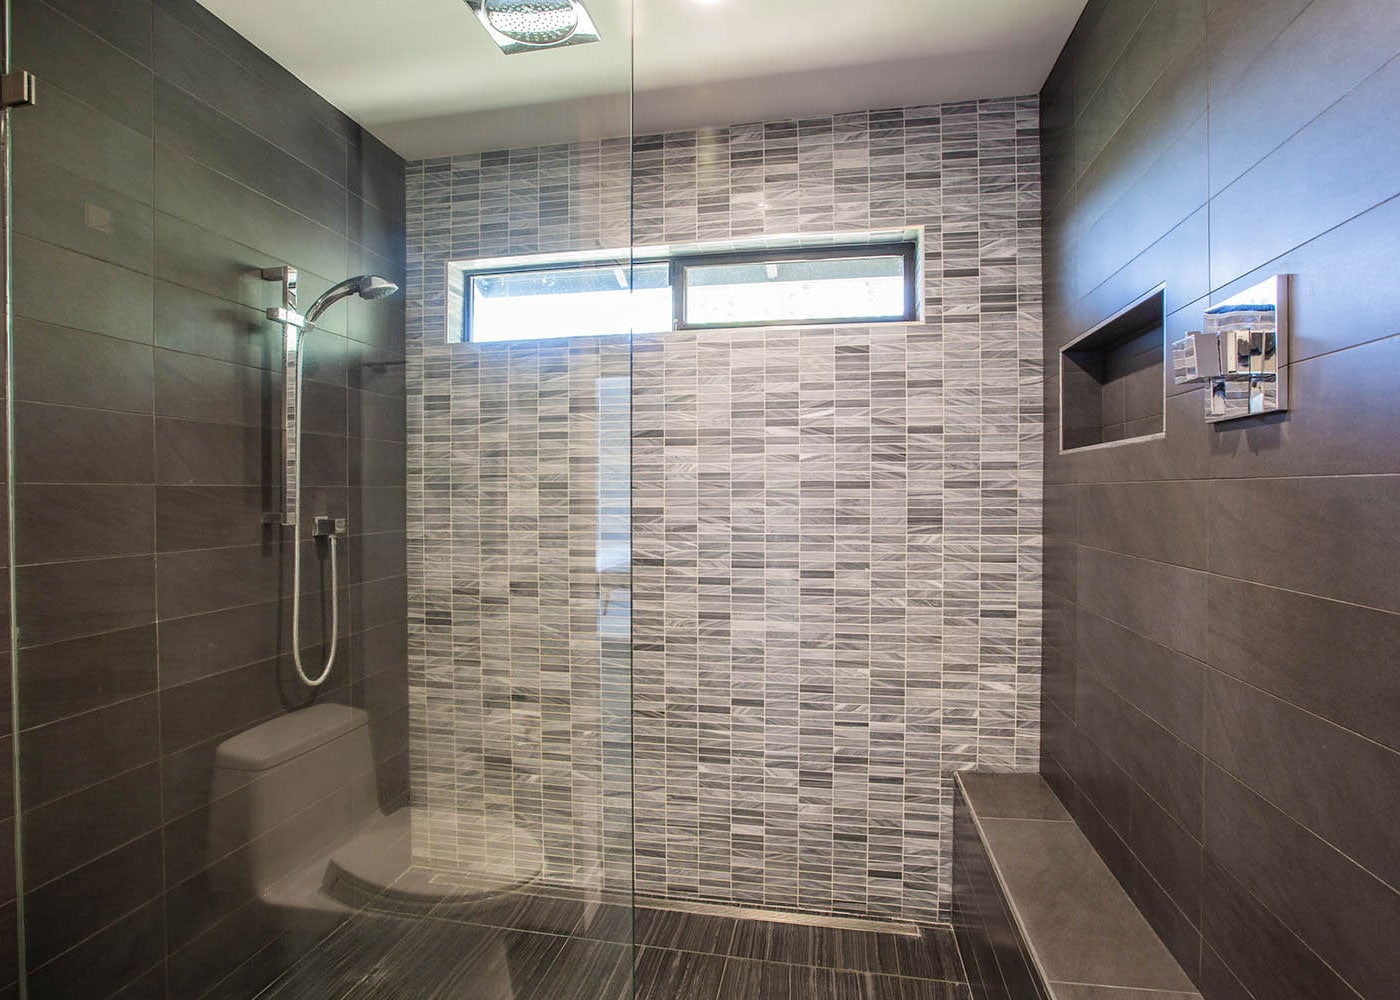 Freshly installed bathroom tile completes a professional walk-in shower installation in Bloomington, IL.